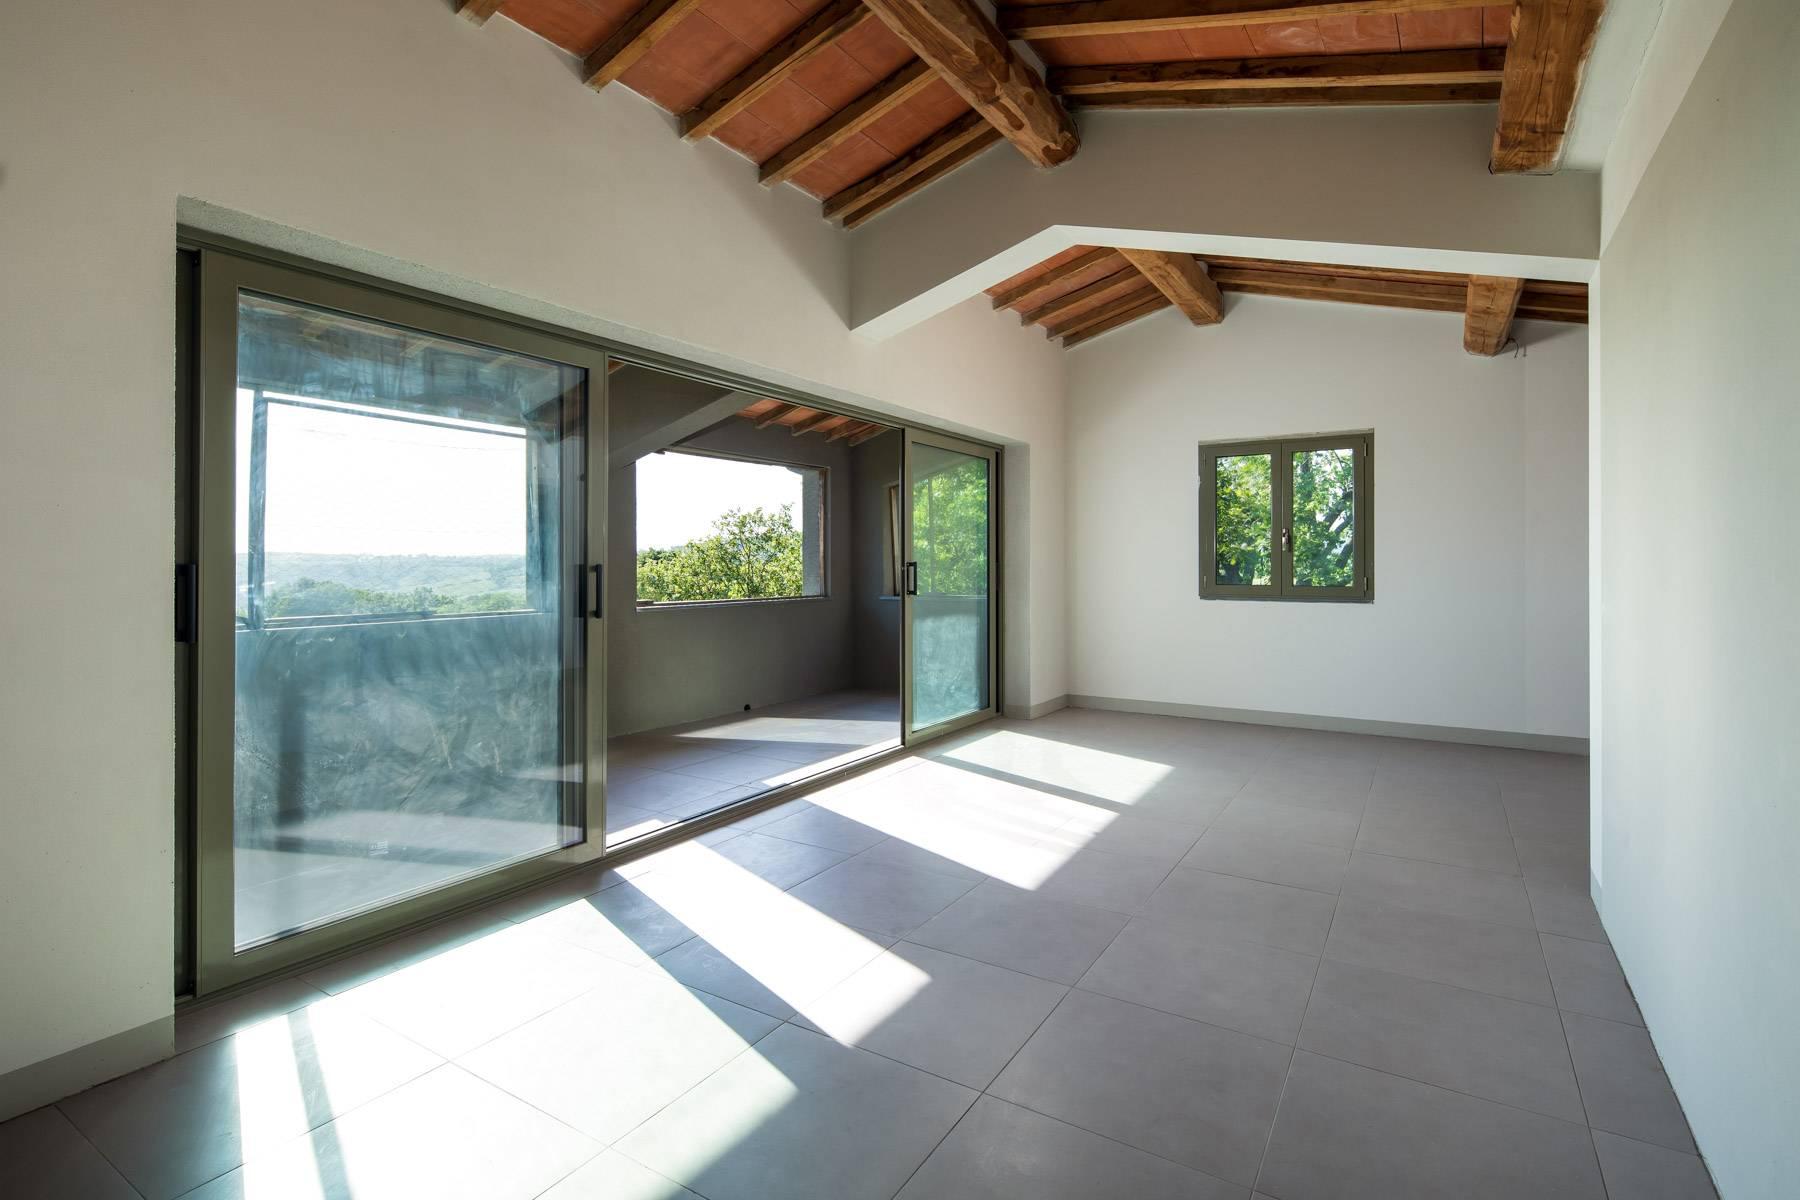 Top location overlooking Argentario and Giglio island - 22